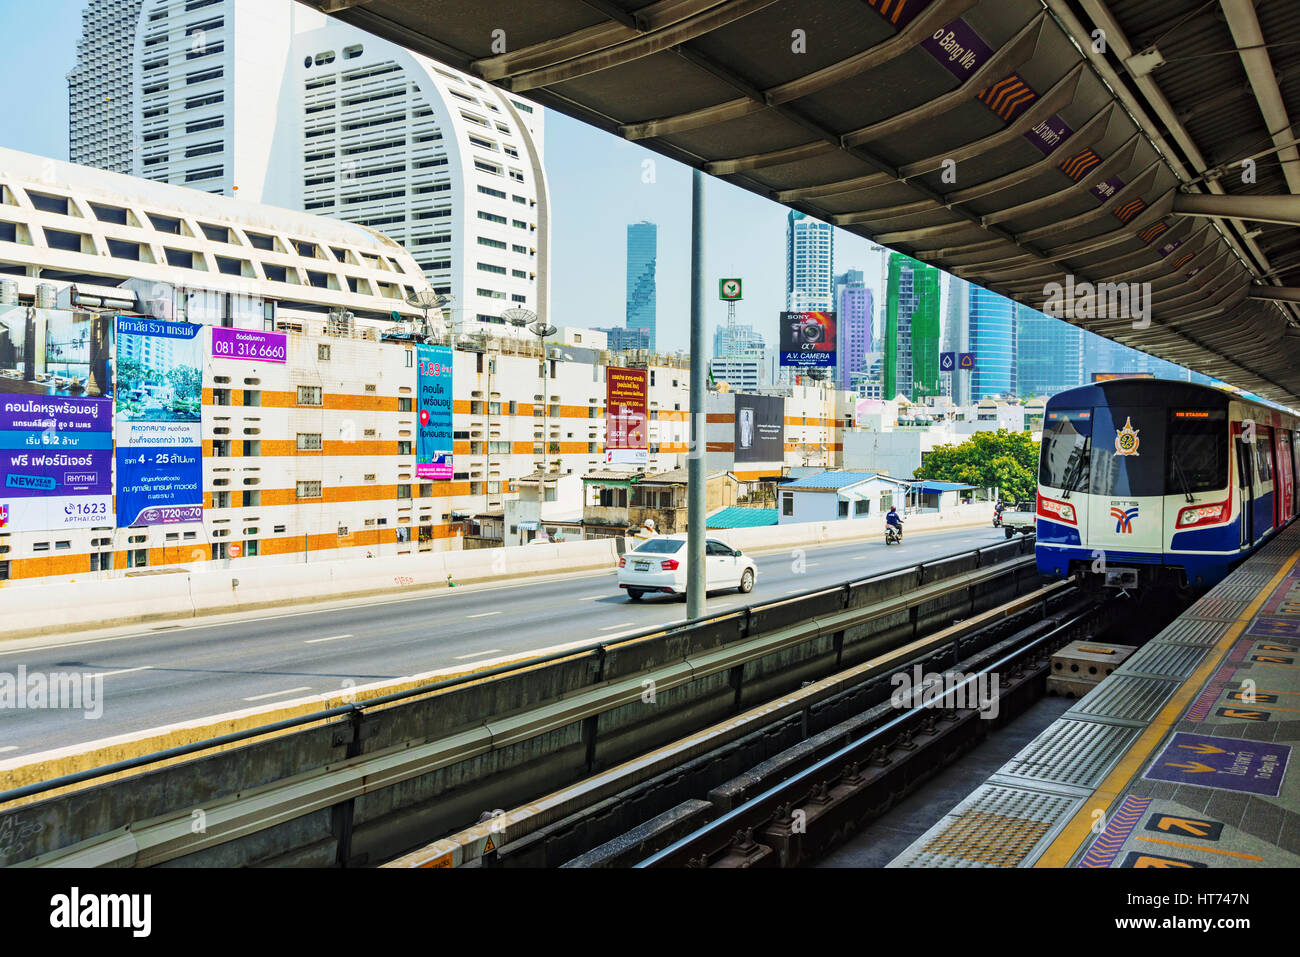 BANGKOK, THAILAND - JANUARY 30: BTS Sky train station platform with a view of downtown Bangkok buildings in the background on January 30, 2017 in Bang Stock Photo